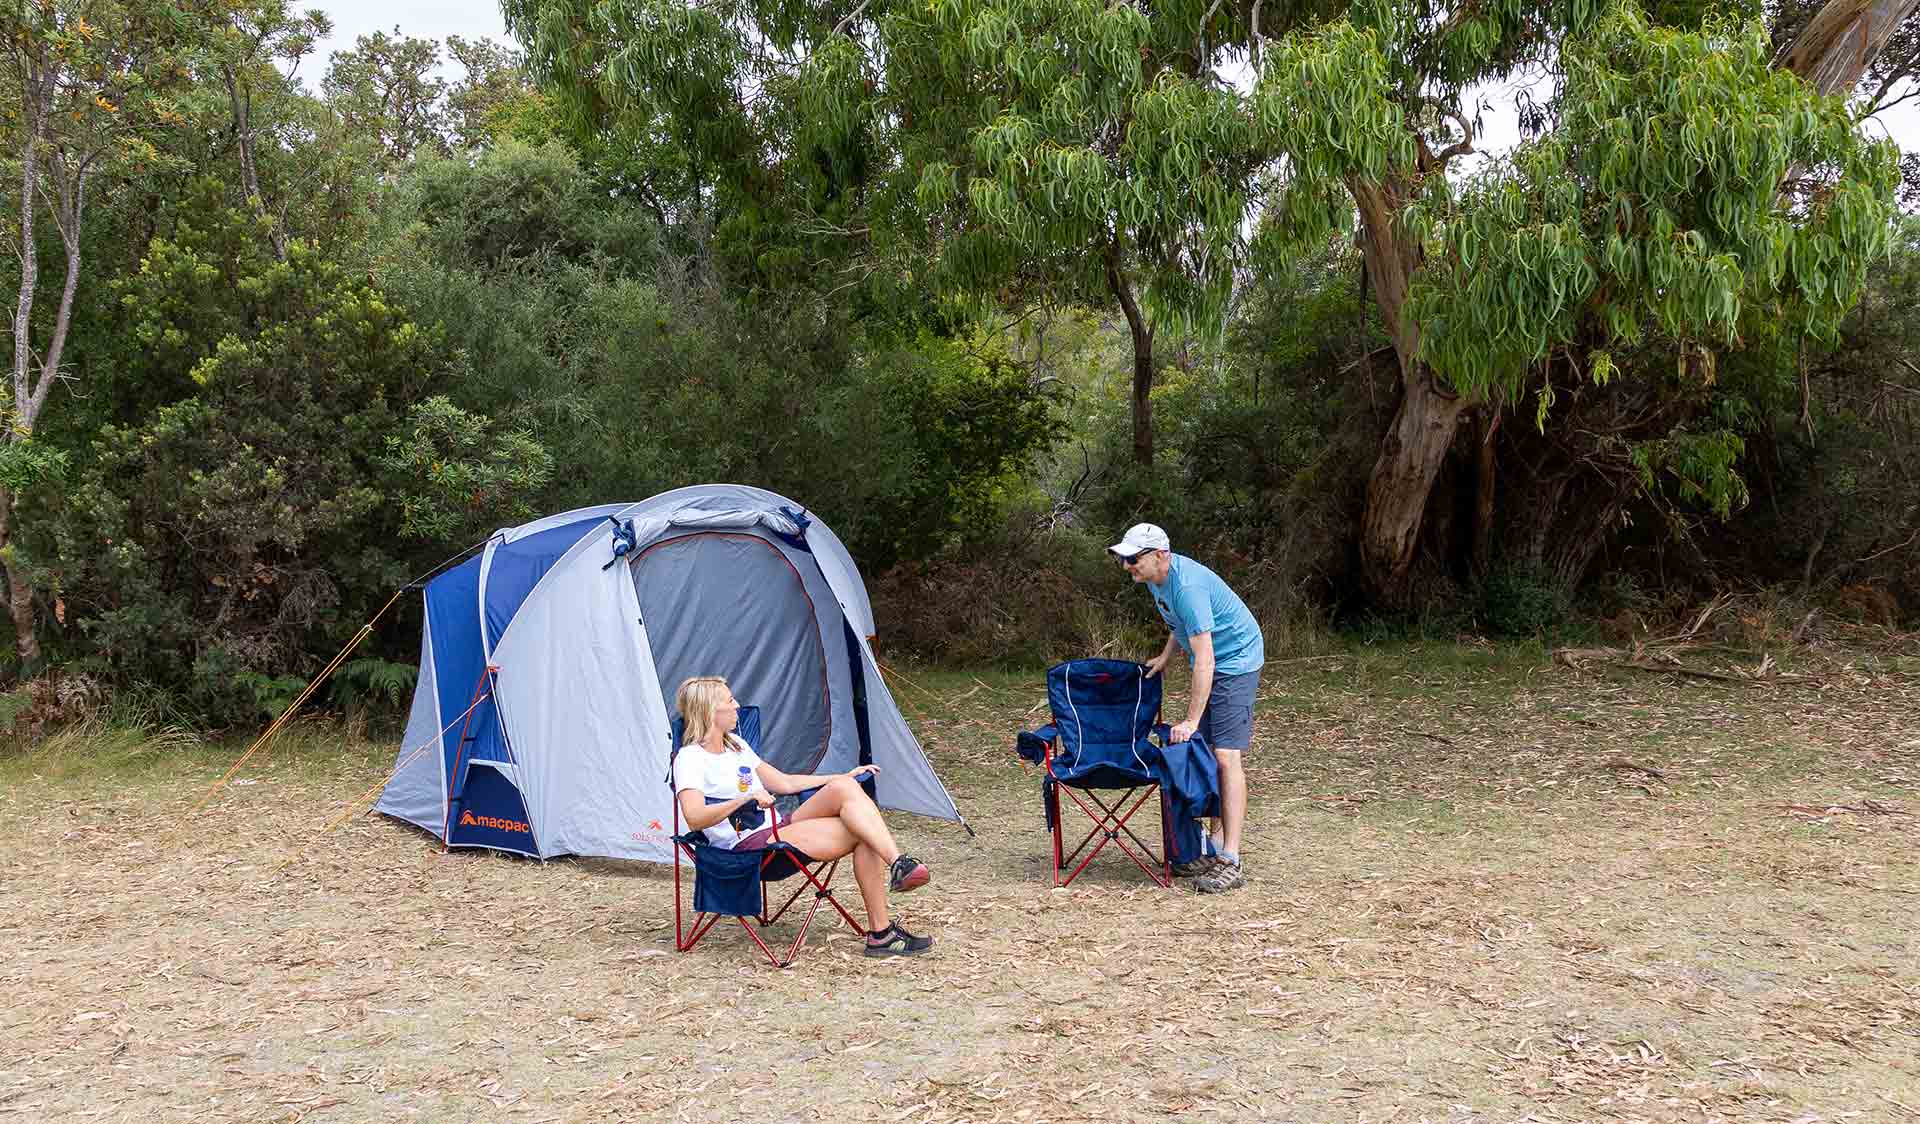 A sets down a camp chair just before sitting down next to an already seated women in front of their tent at Stockyards Campground at WIlsons Promontory National Park